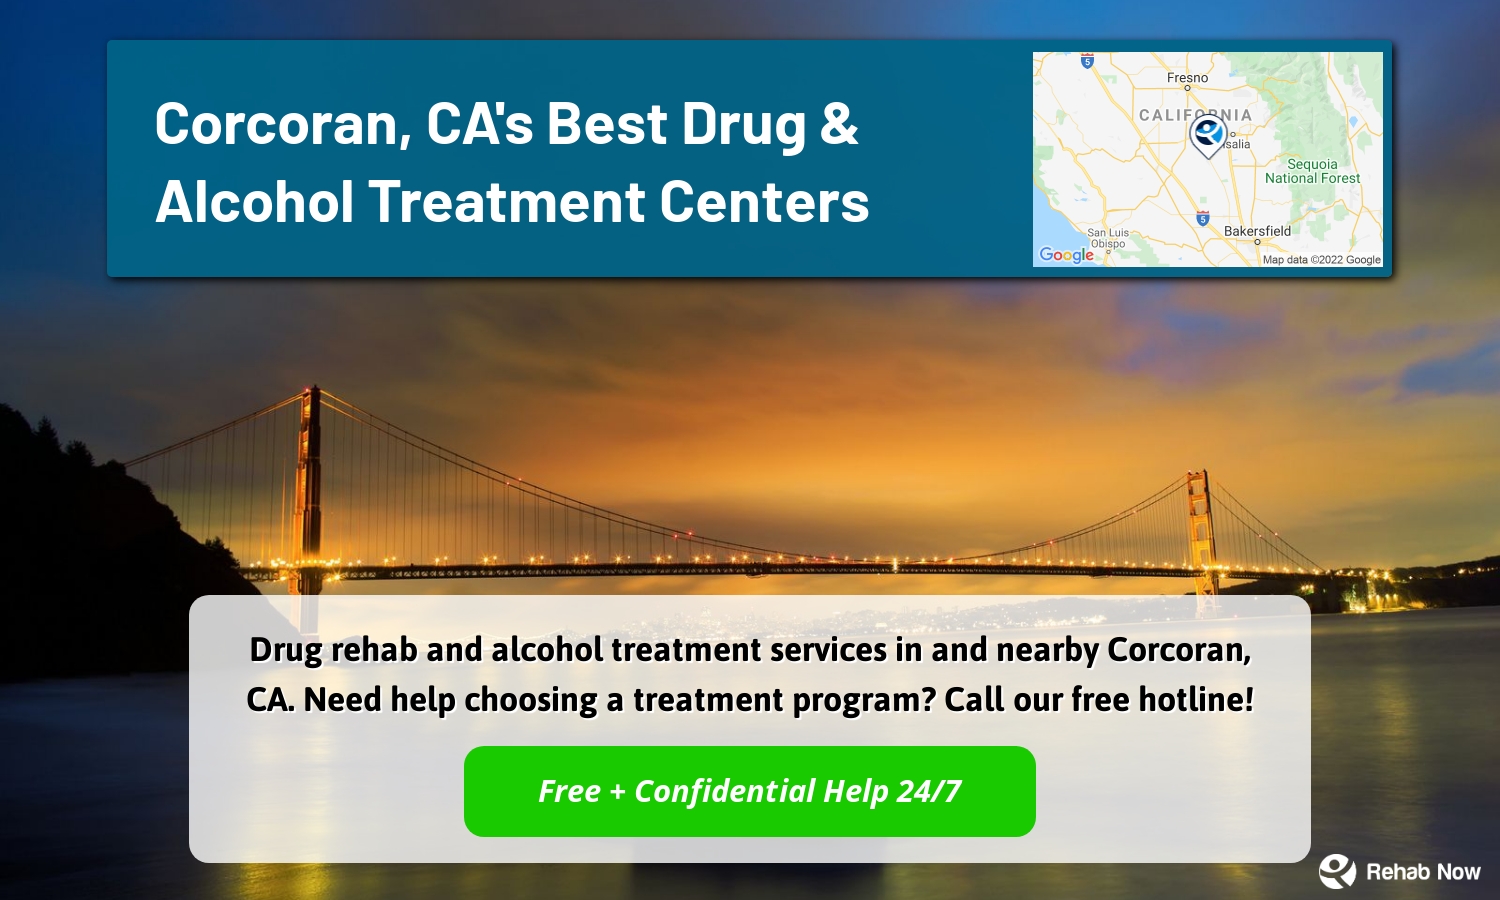 Drug rehab and alcohol treatment services in and nearby Corcoran, CA. Need help choosing a treatment program? Call our free hotline!